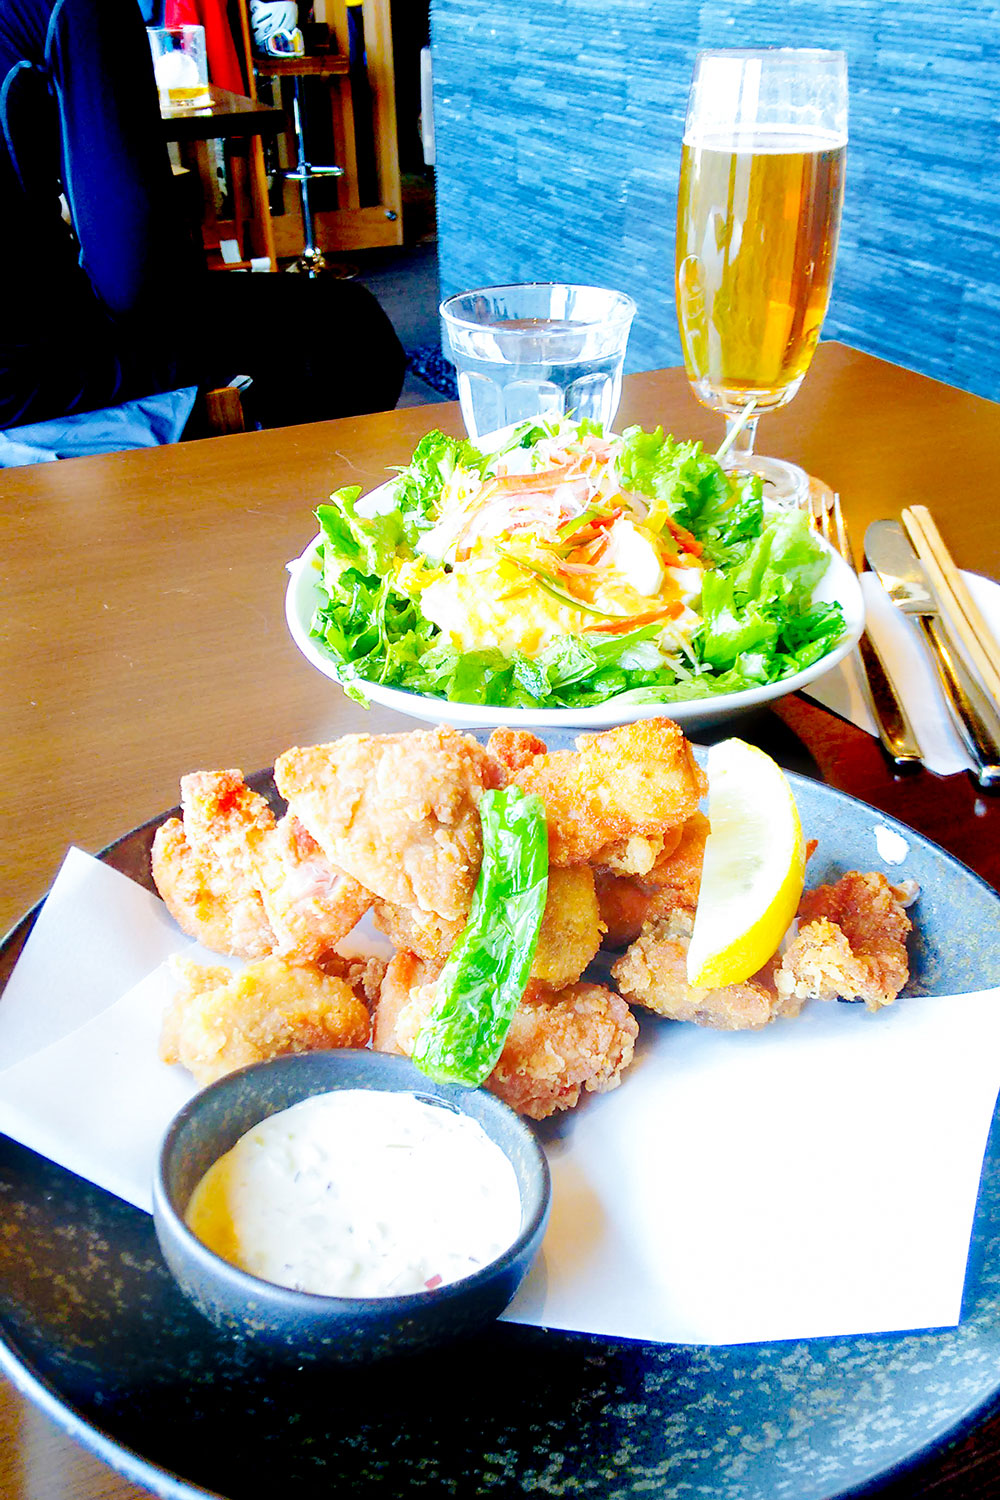 Japanese fried chicken tofu salad and beer